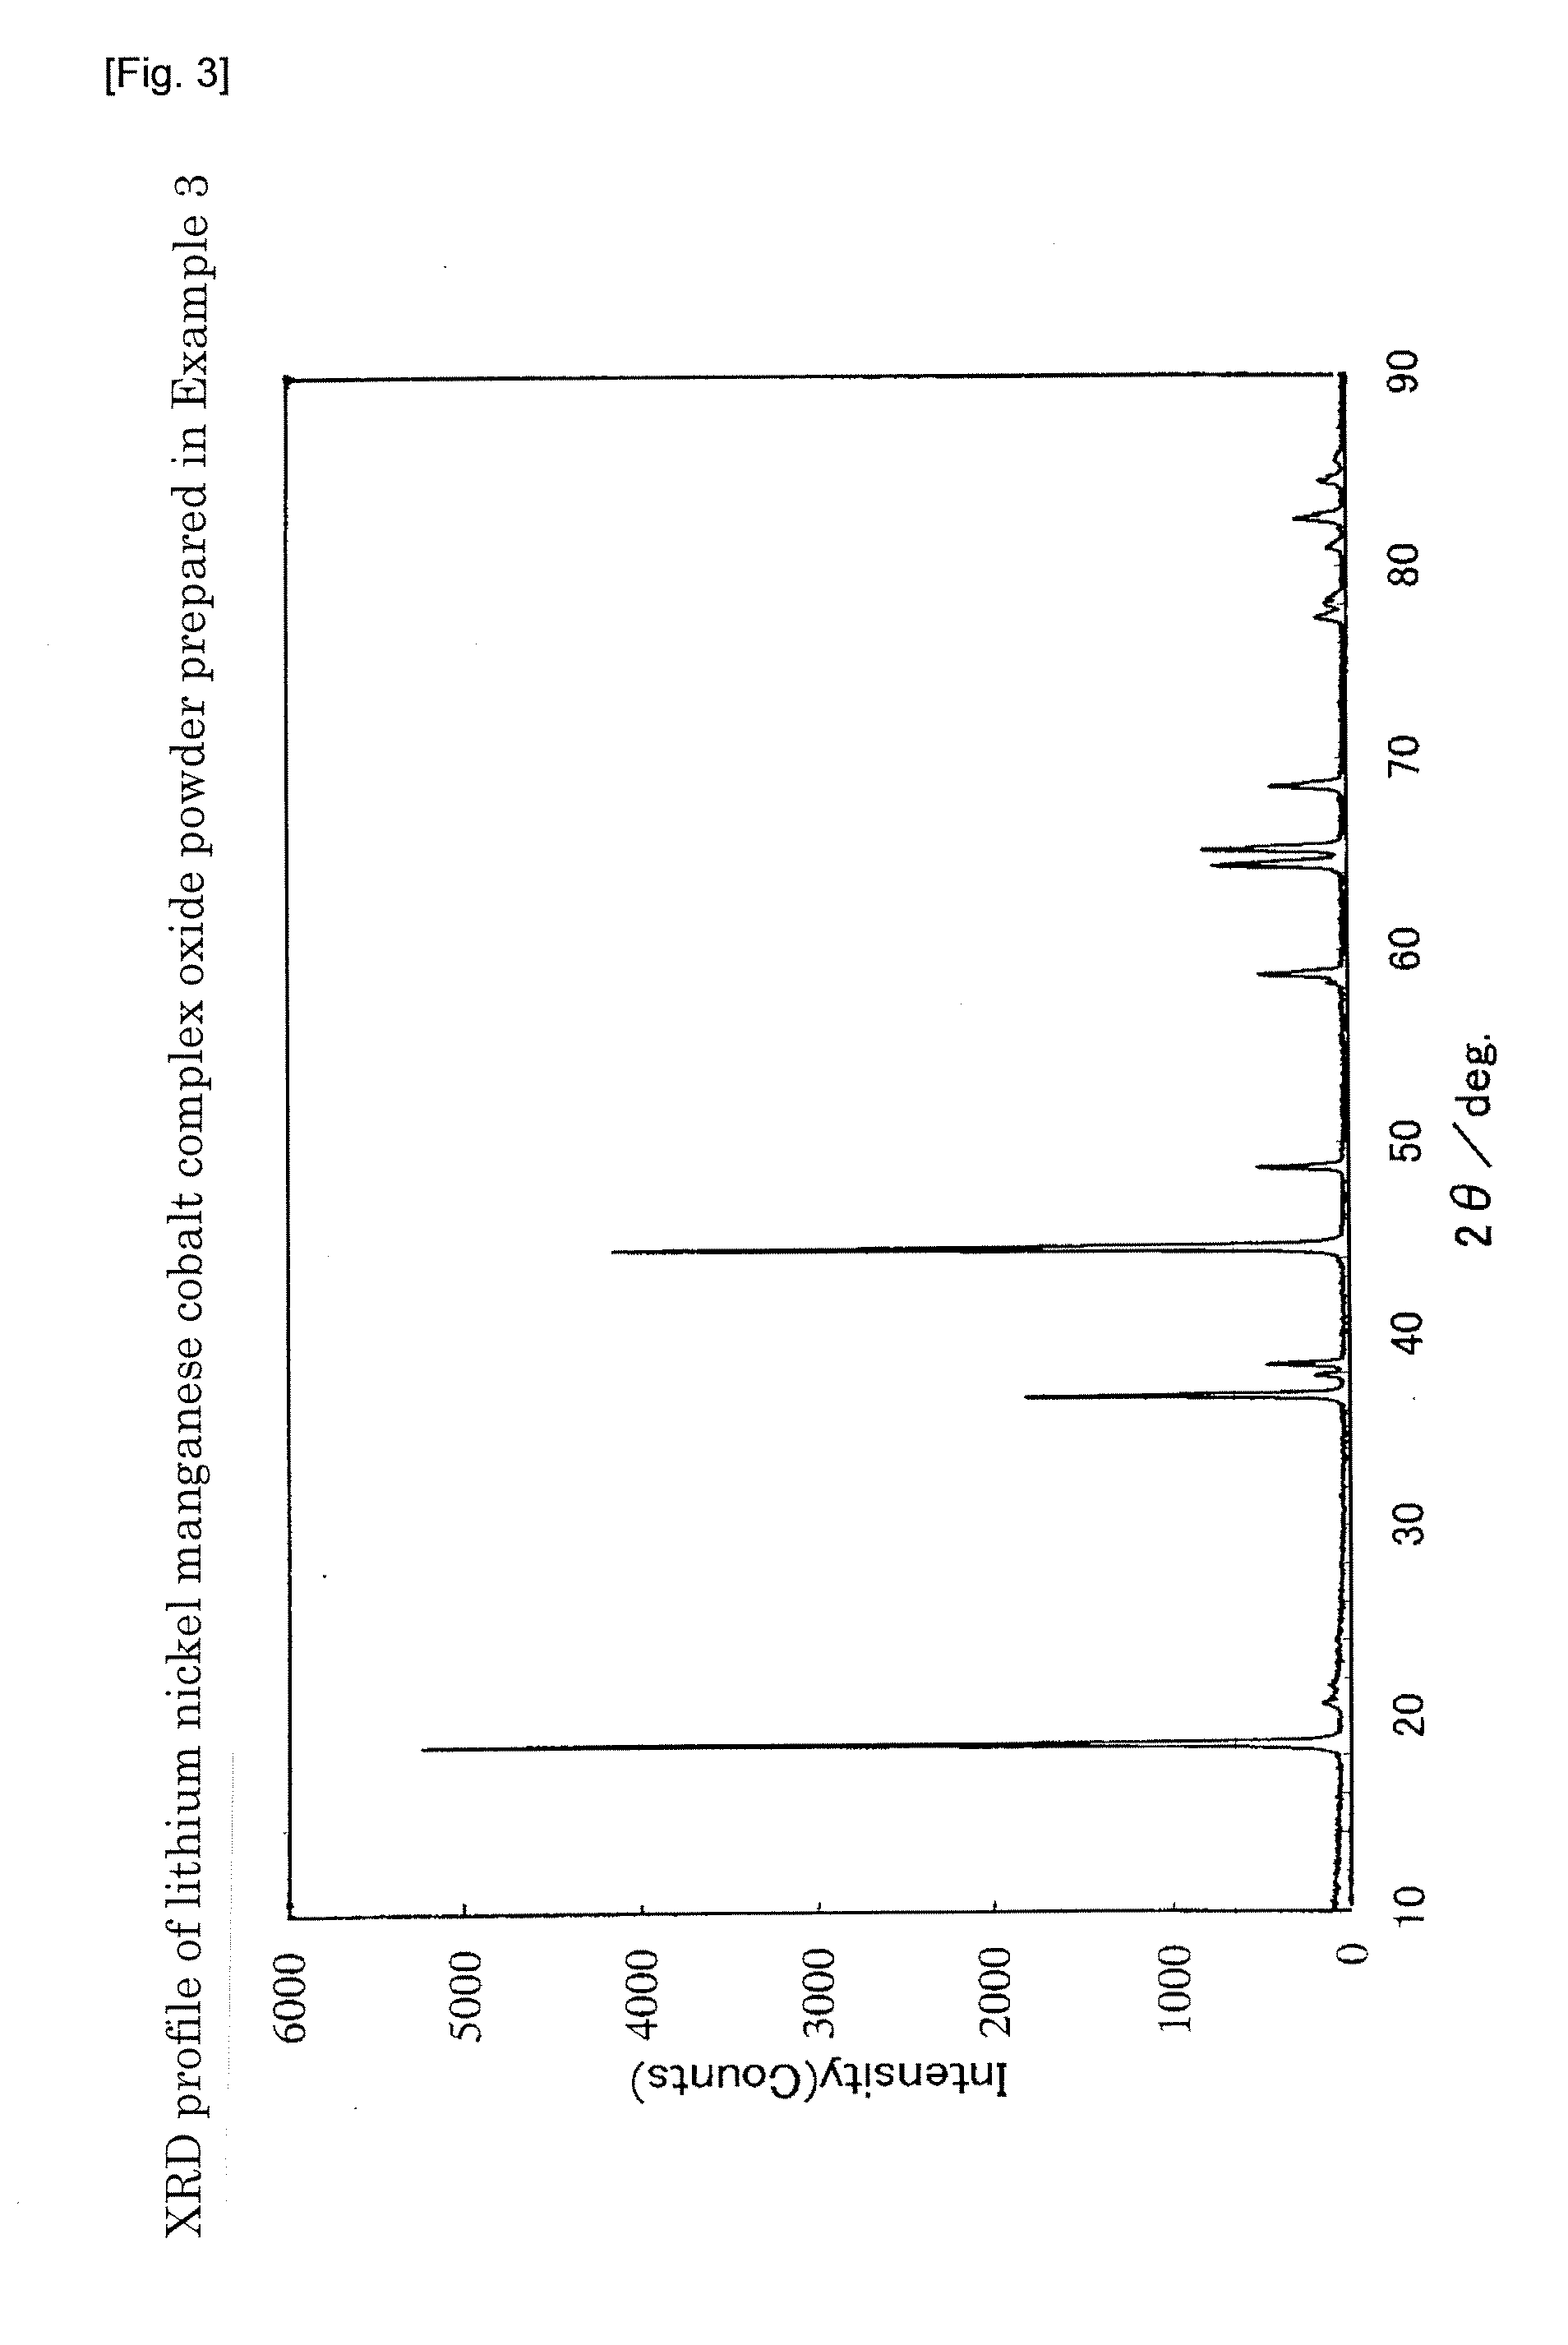 Lithium secondary battery and positive electrode material thereof